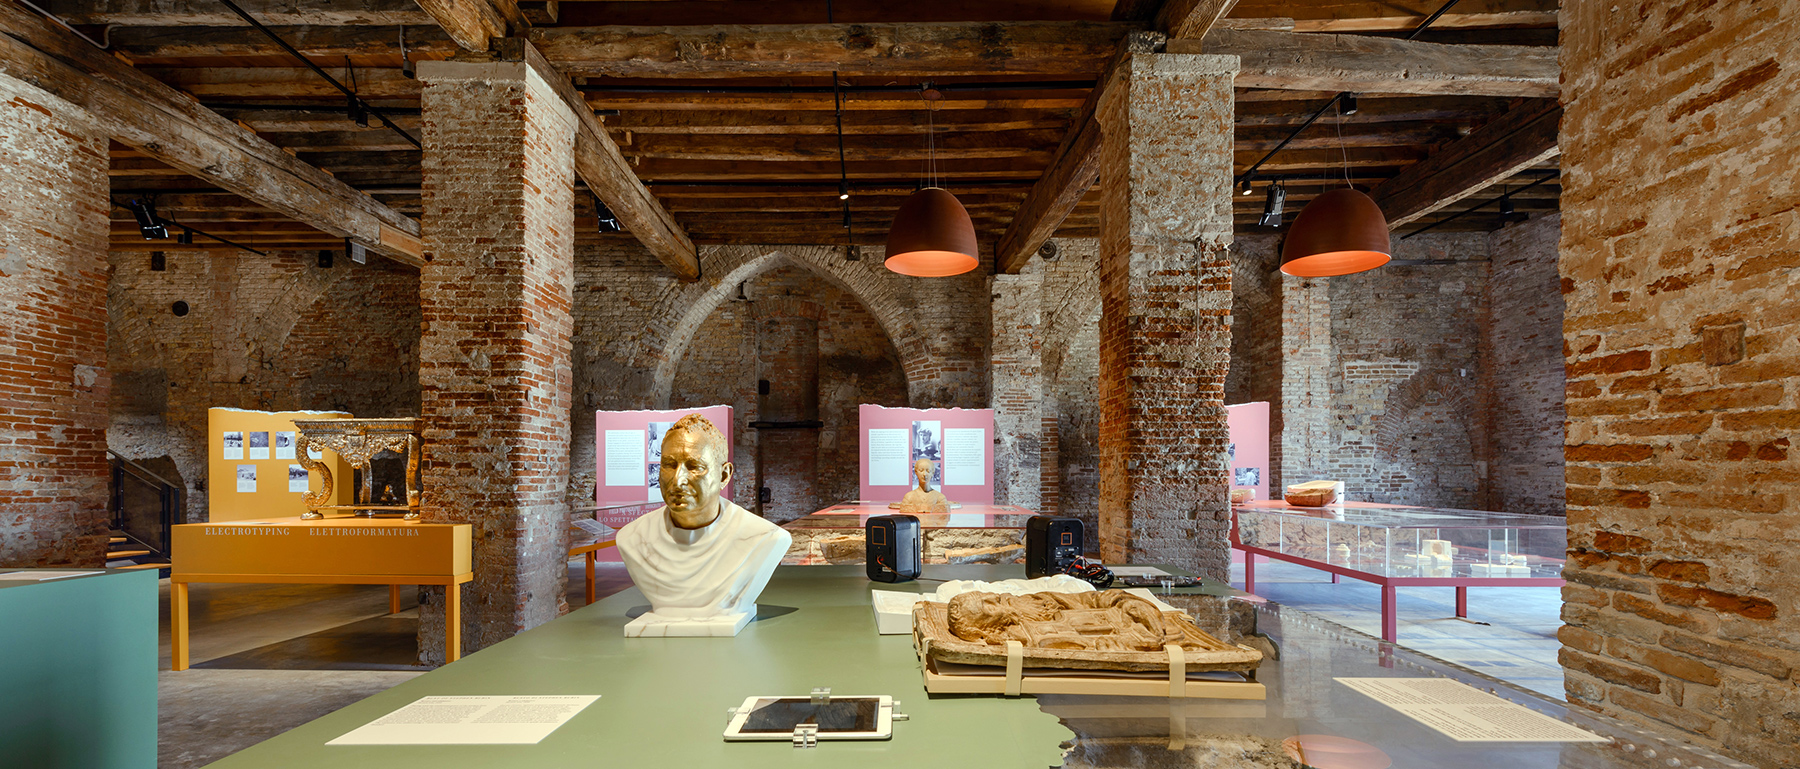 V&A's 'a world of fragile parts' at venice architecture biennale